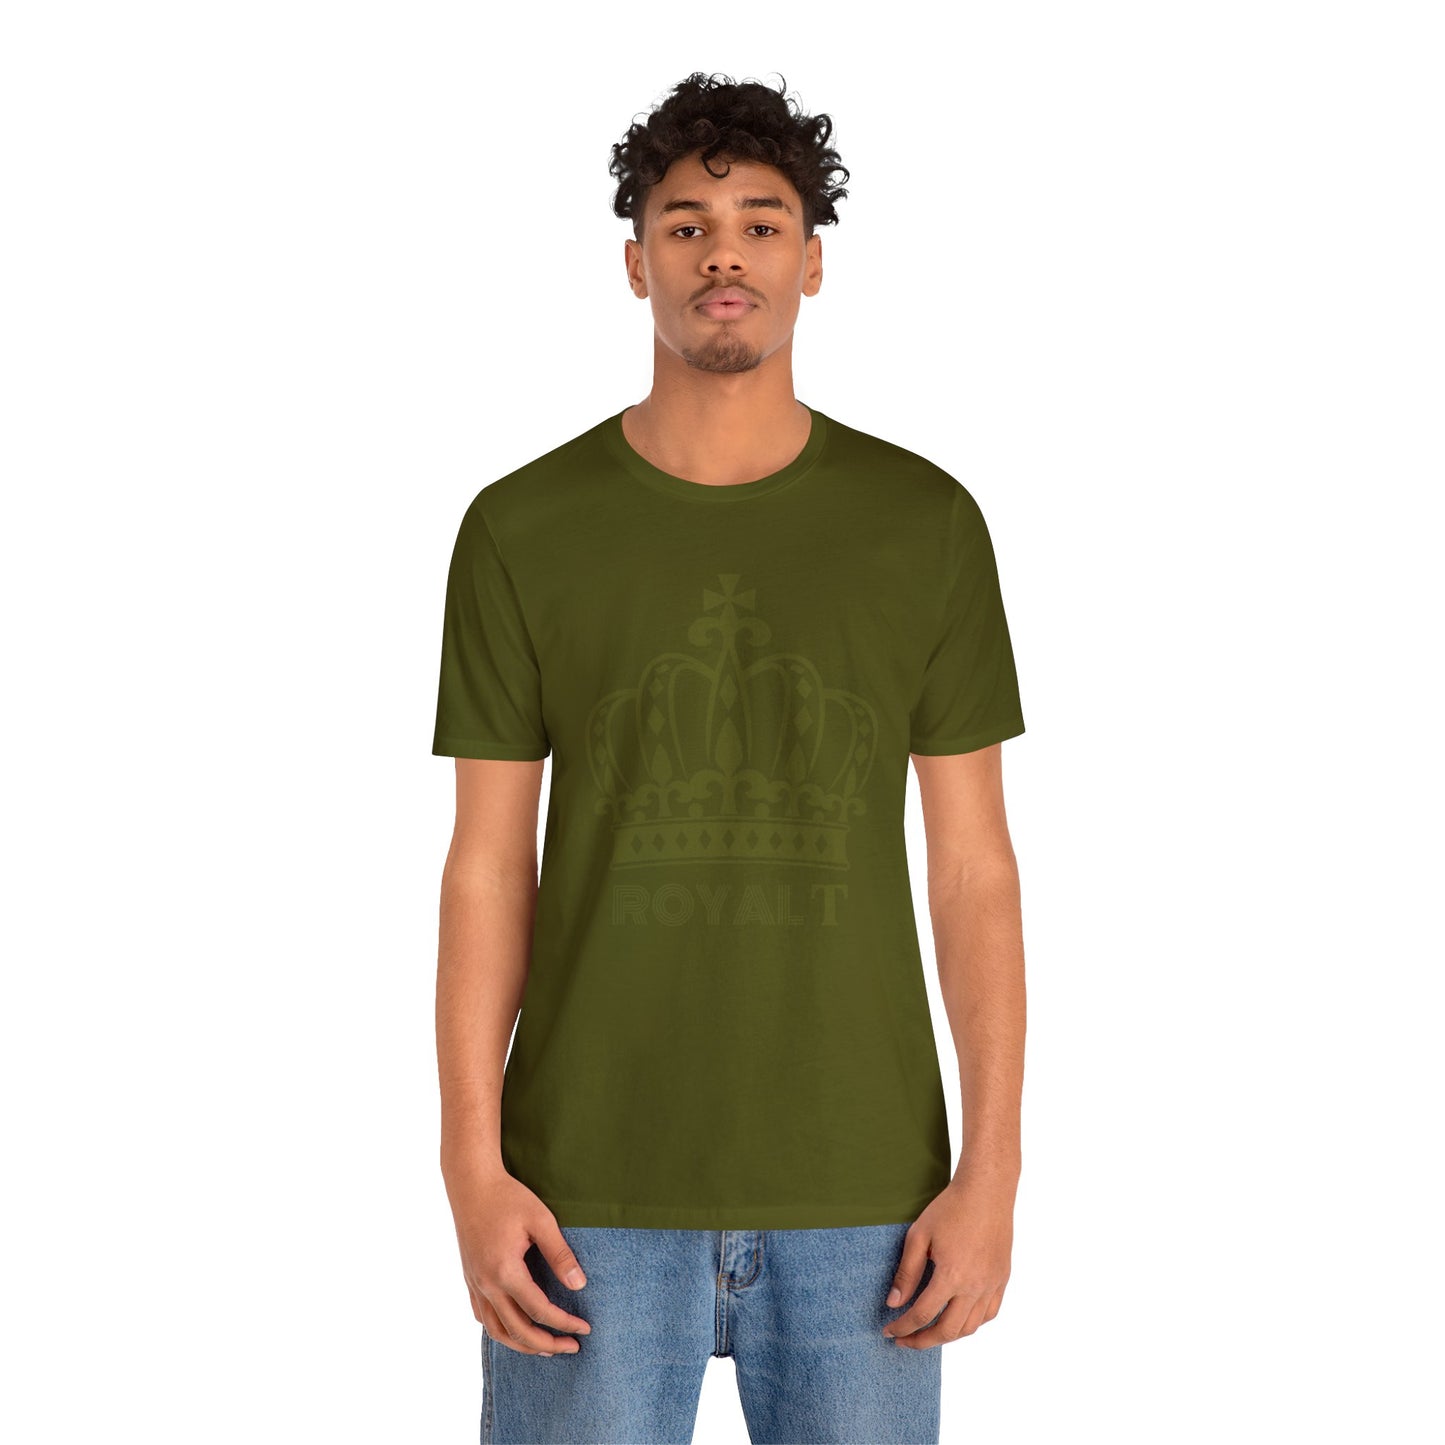 Olive Green - Unisex Jersey Short Sleeve T Shirt - Olive Green Royal T